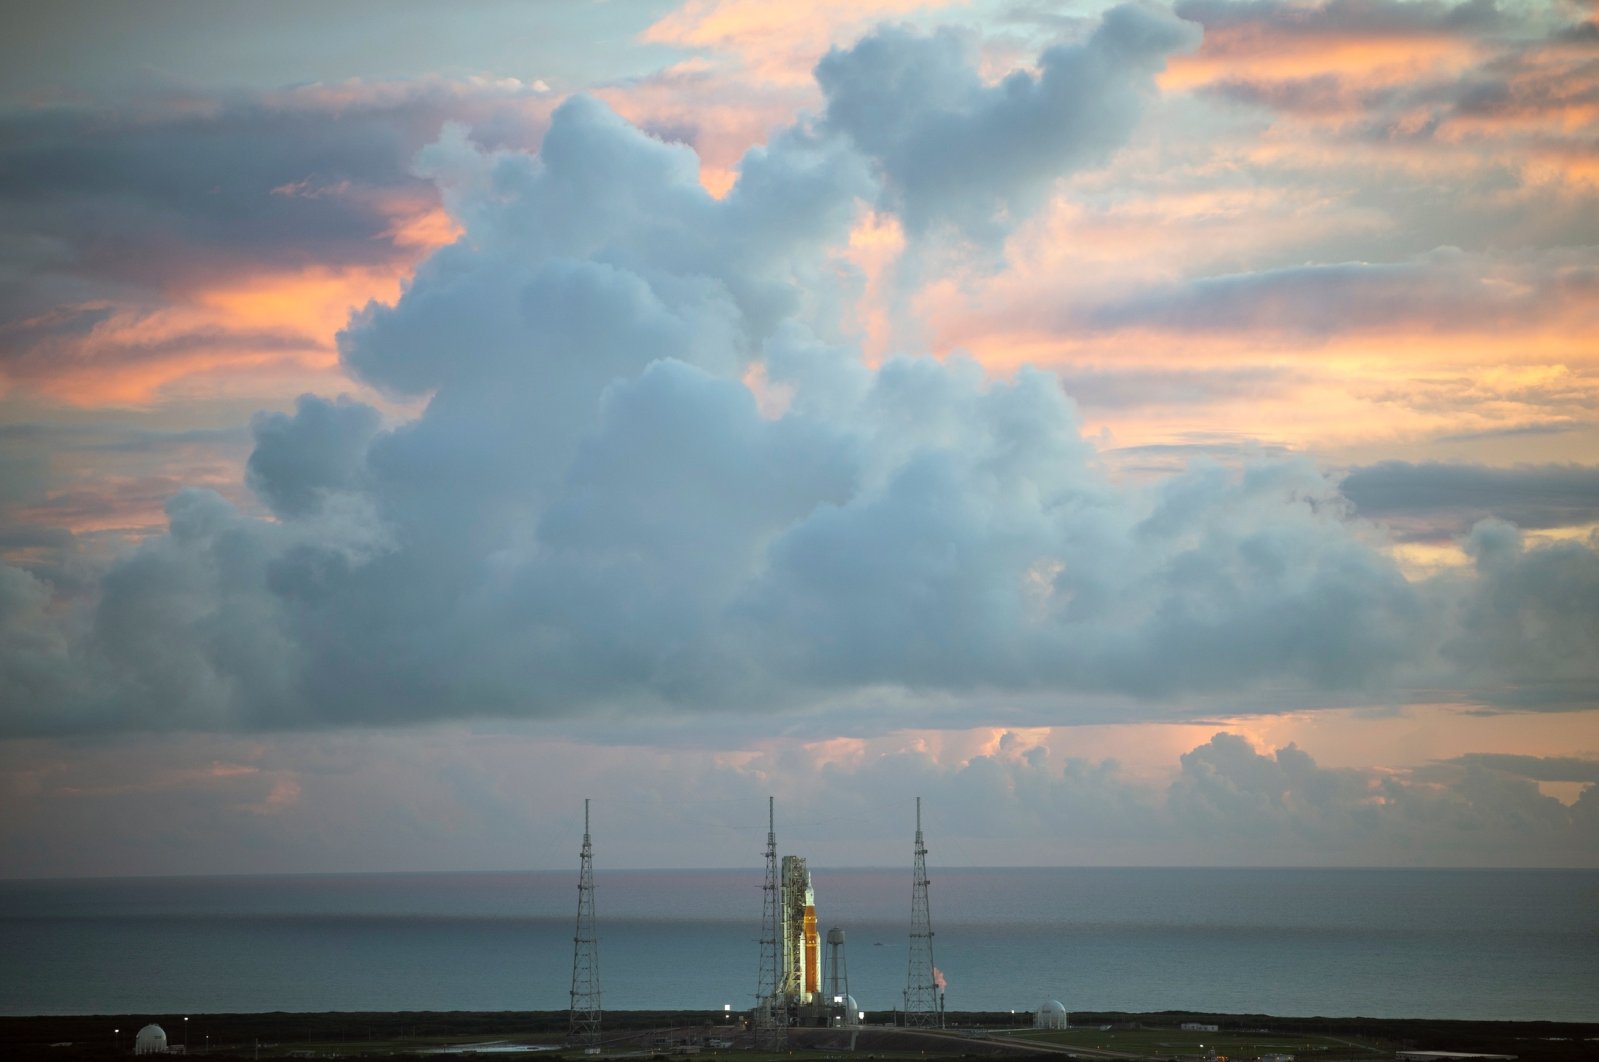 The NASA moon rocket stands ready at sunrise on Pad 39B before the Artemis 1 mission to orbit the moon at the Kennedy Space Center, in Cape Canaveral, Florida, U.S., Aug. 29, 2022. (AP Photo)